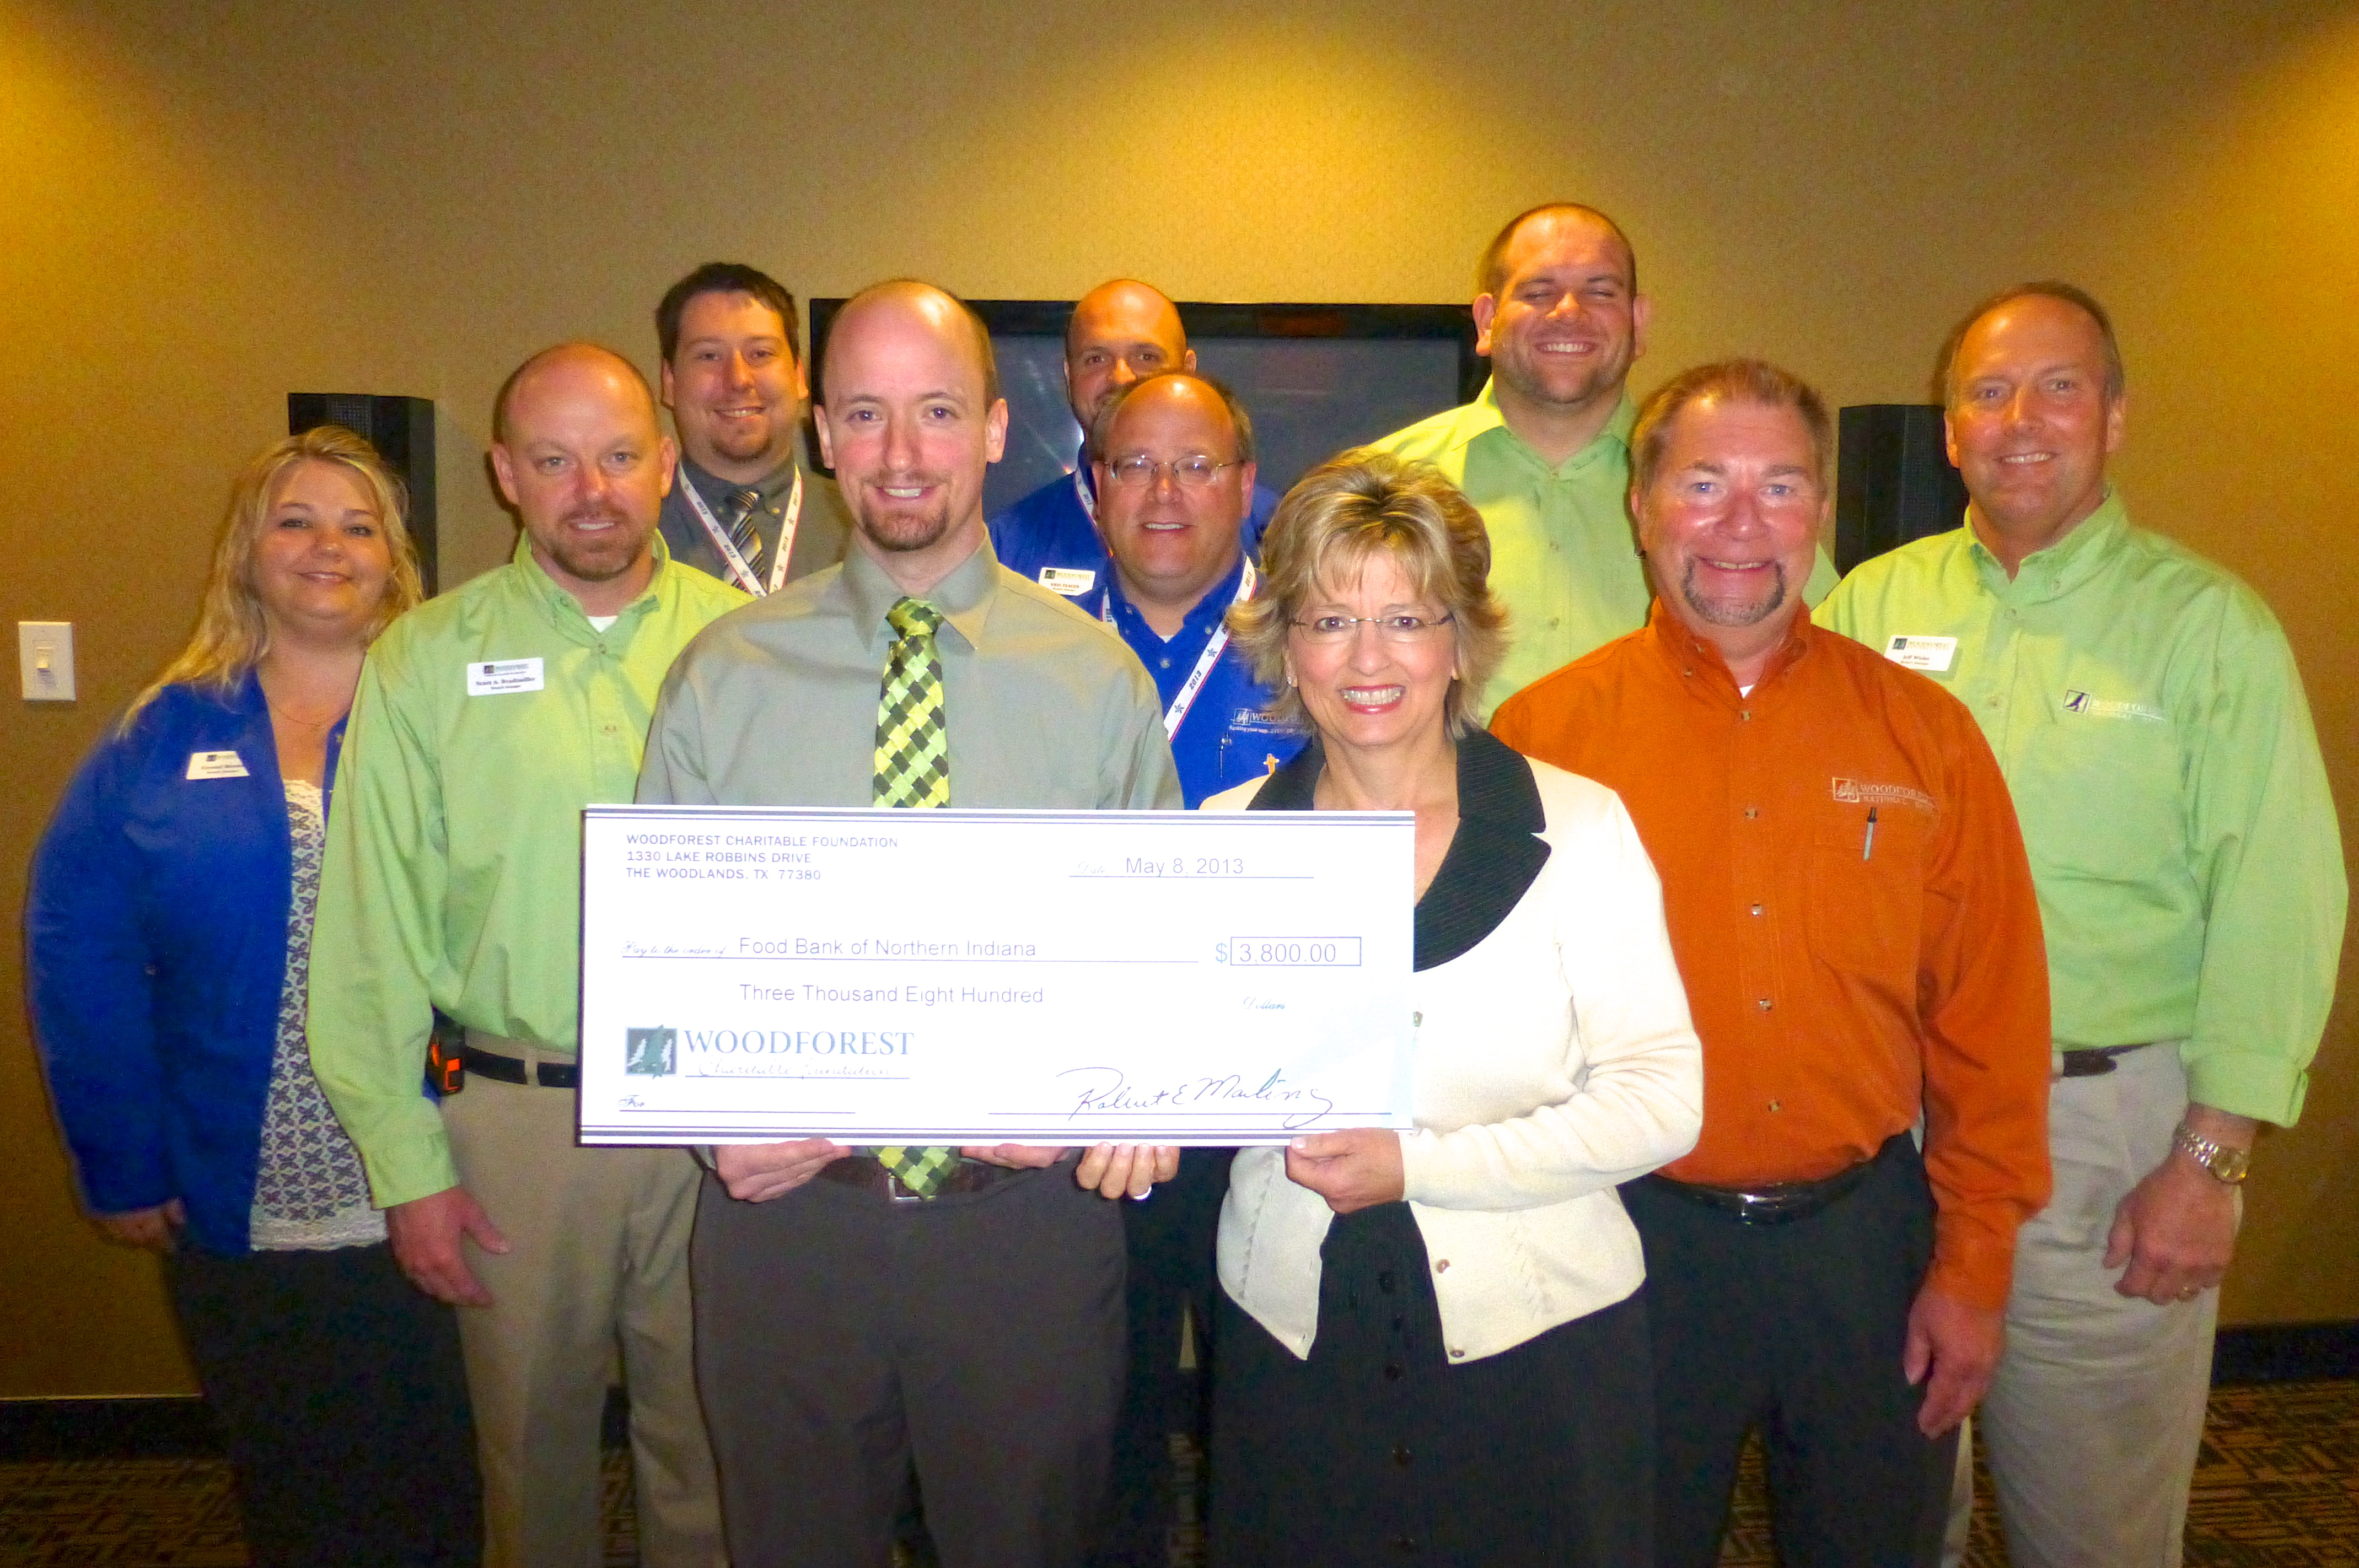 Food Bank of Northern Indiana Receives $3,800 donation from Woodforest Charitable Foundation.